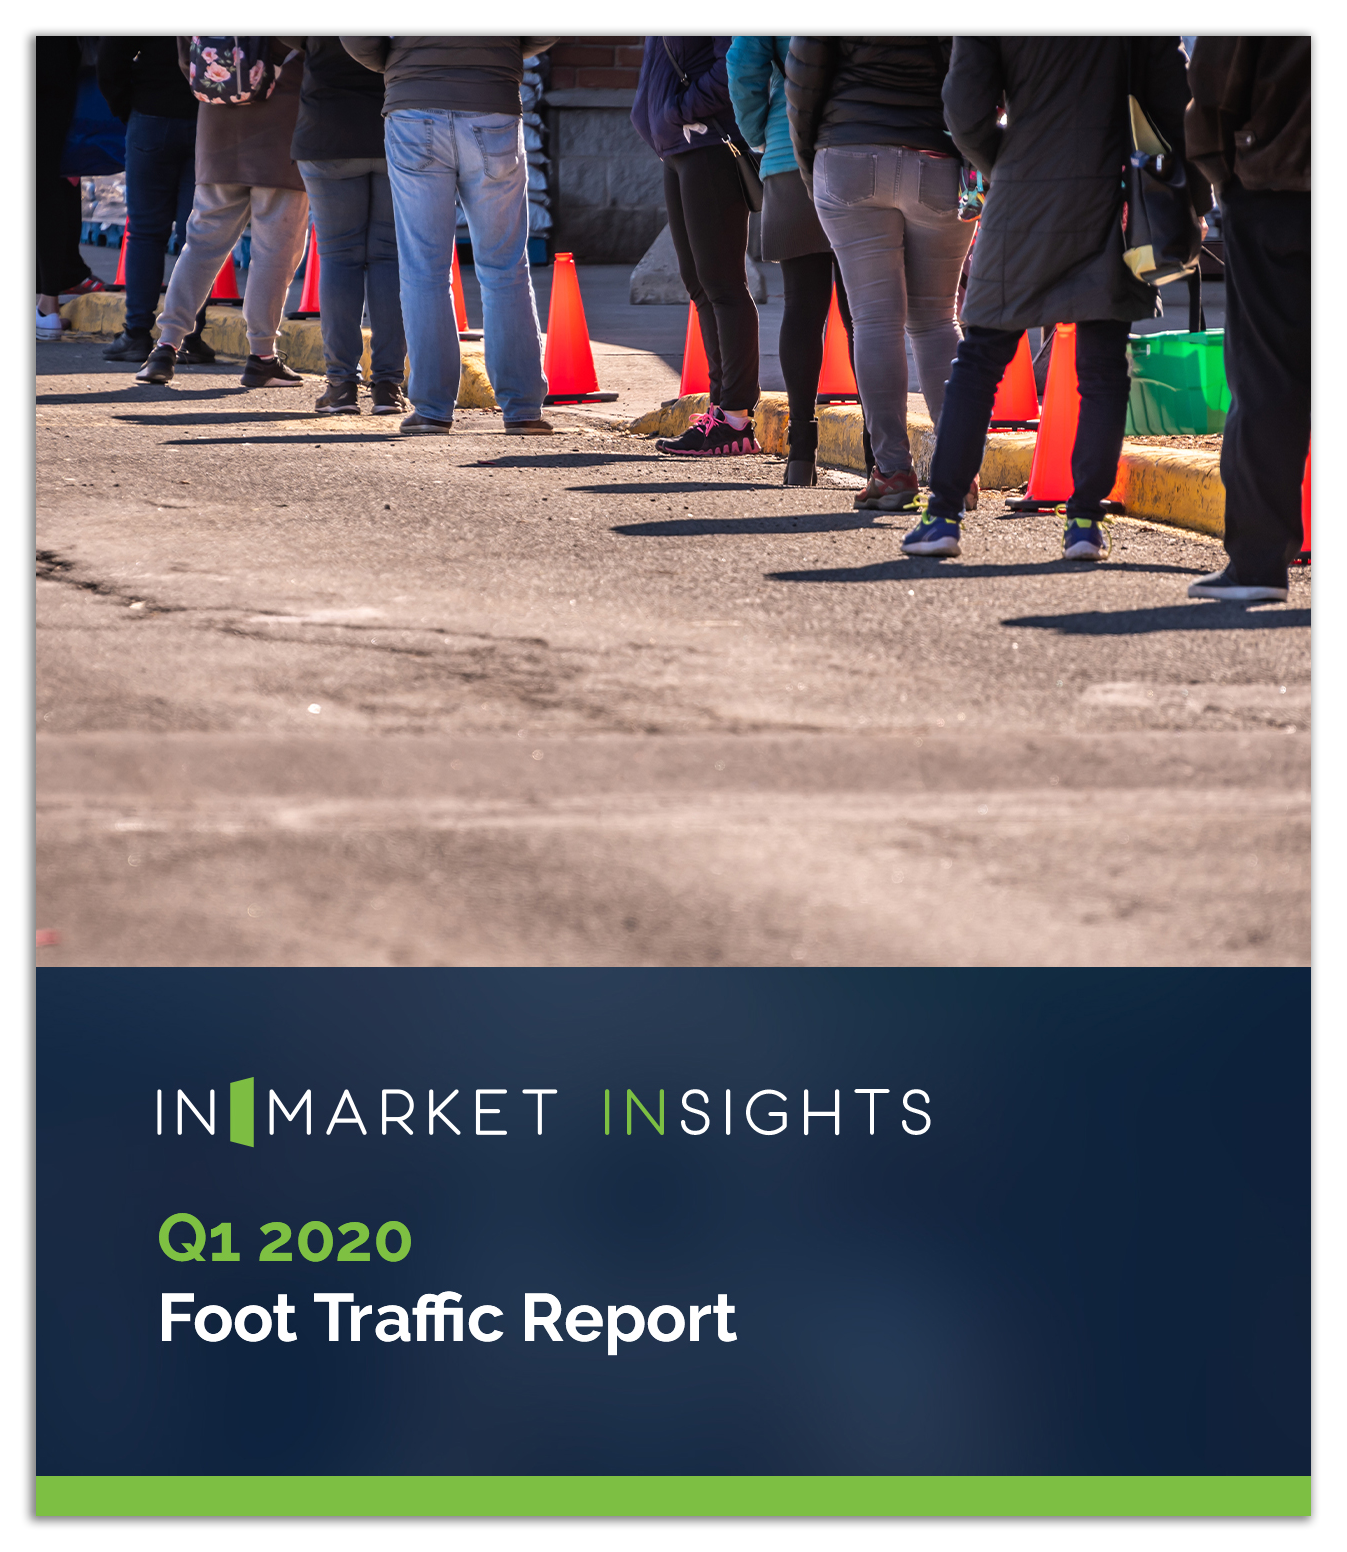 Q1 2020 Foot Traffic Report Cover Image Shadowed